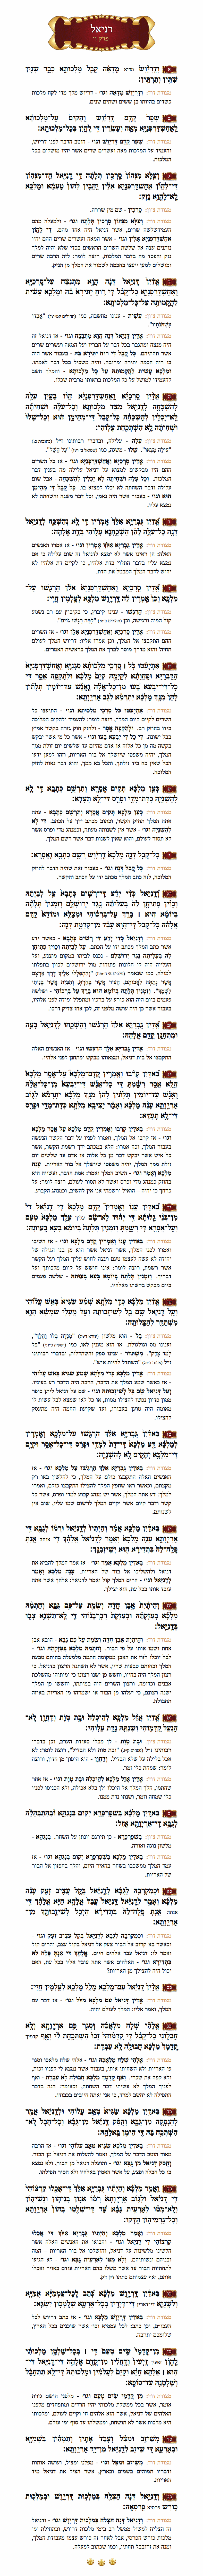 Sefer Daniel Chapter 6 with commentary